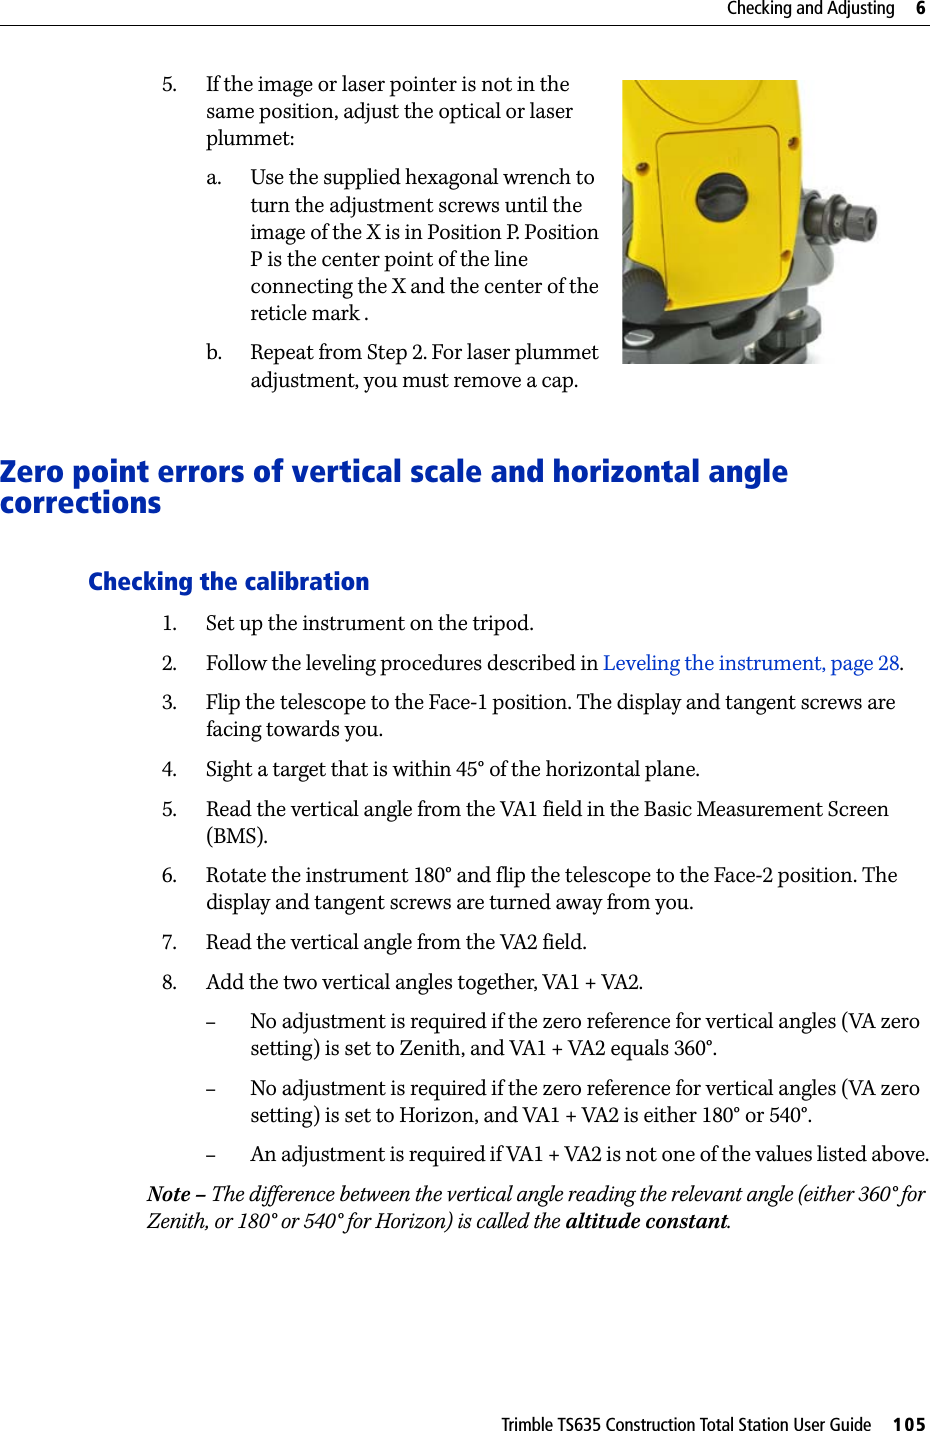 Trimble TS635 Construction Total Station User Guide     105Checking and Adjusting     65. If the image or laser pointer is not in the same position, adjust the optical or laser plummet:a. Use the supplied hexagonal wrench to turn the adjustment screws until the image of the X is in Position P. Position P is the center point of the line connecting the X and the center of the reticle mark .b. Repeat from Step 2. For laser plummet adjustment, you must remove a cap.Zero point errors of vertical scale and horizontal angle correctionsChecking the calibration1. Set up the instrument on the tripod.2. Follow the leveling procedures described in Leveling the instrument, page 28.3. Flip the telescope to the Face-1 position. The display and tangent screws are facing towards you.4. Sight a target that is within 45° of the horizontal plane.5. Read the vertical angle from the VA1 field in the Basic Measurement Screen (BMS).6. Rotate the instrument 180° and flip the telescope to the Face-2 position. The display and tangent screws are turned away from you.7. Read the vertical angle from the VA2 field.8. Add the two vertical angles together, VA1 + VA2.–No adjustment is required if the zero reference for vertical angles (VA zero setting) is set to Zenith, and VA1 + VA2 equals 360°. –No adjustment is required if the zero reference for vertical angles (VA zero setting) is set to Horizon, and VA1 + VA2 is either 180° or 540°.–An adjustment is required if VA1 + VA2 is not one of the values listed above.Note – The difference between the vertical angle reading the relevant angle (either 360° for Zenith, or 180° or 540° for Horizon) is called the altitude constant.